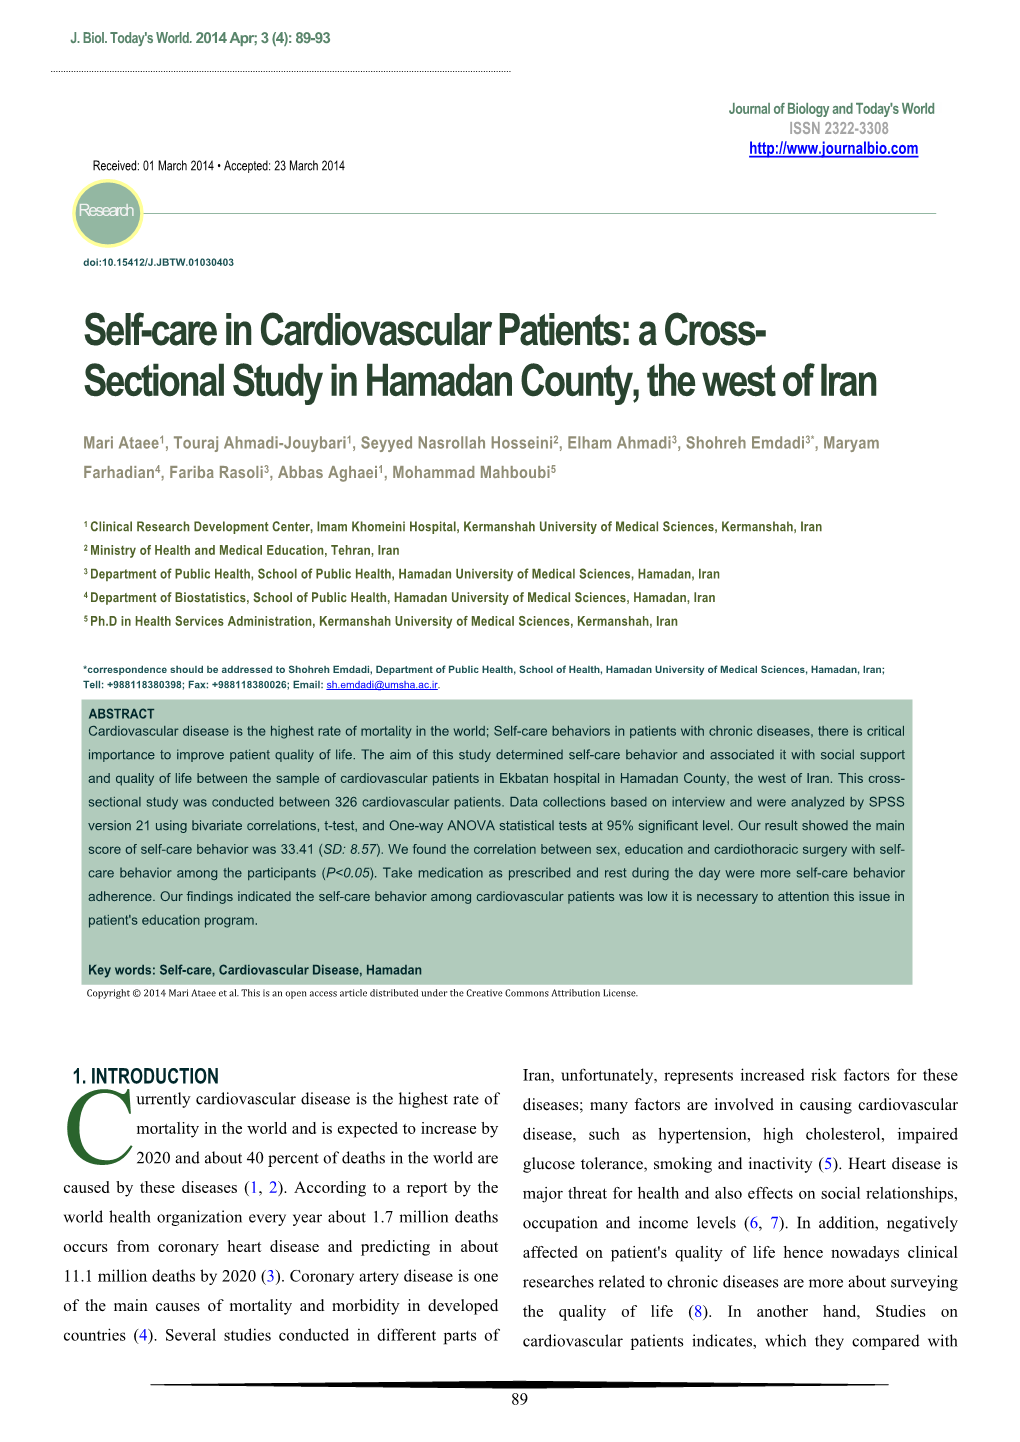 Self-Care in Cardiovascular Patients: a Cross-Sectional Study in Hamadan